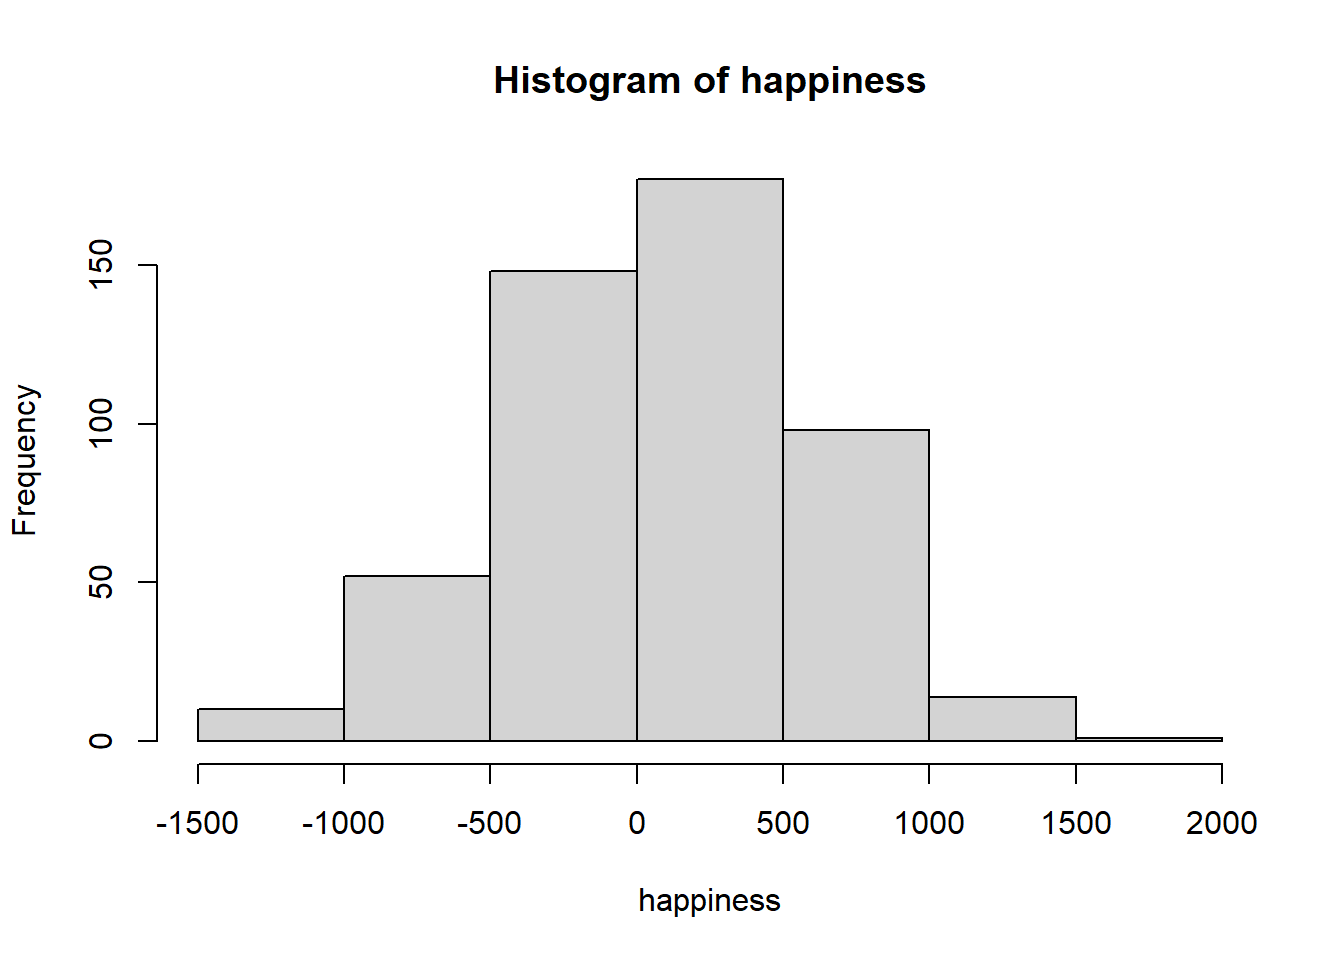 A histogram of the happiness ratings